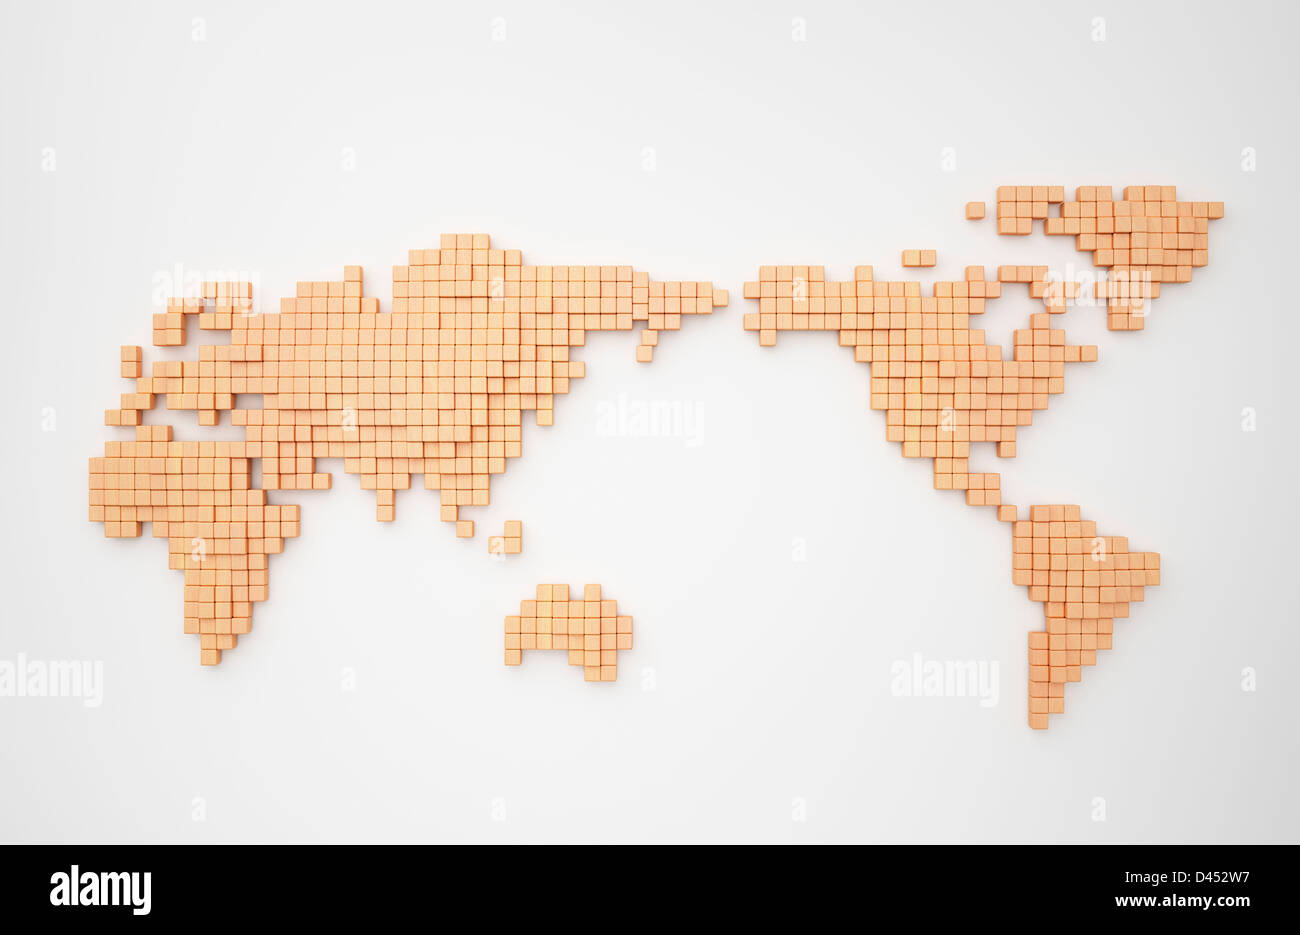 wooden blocks forming a world map Stock Photo